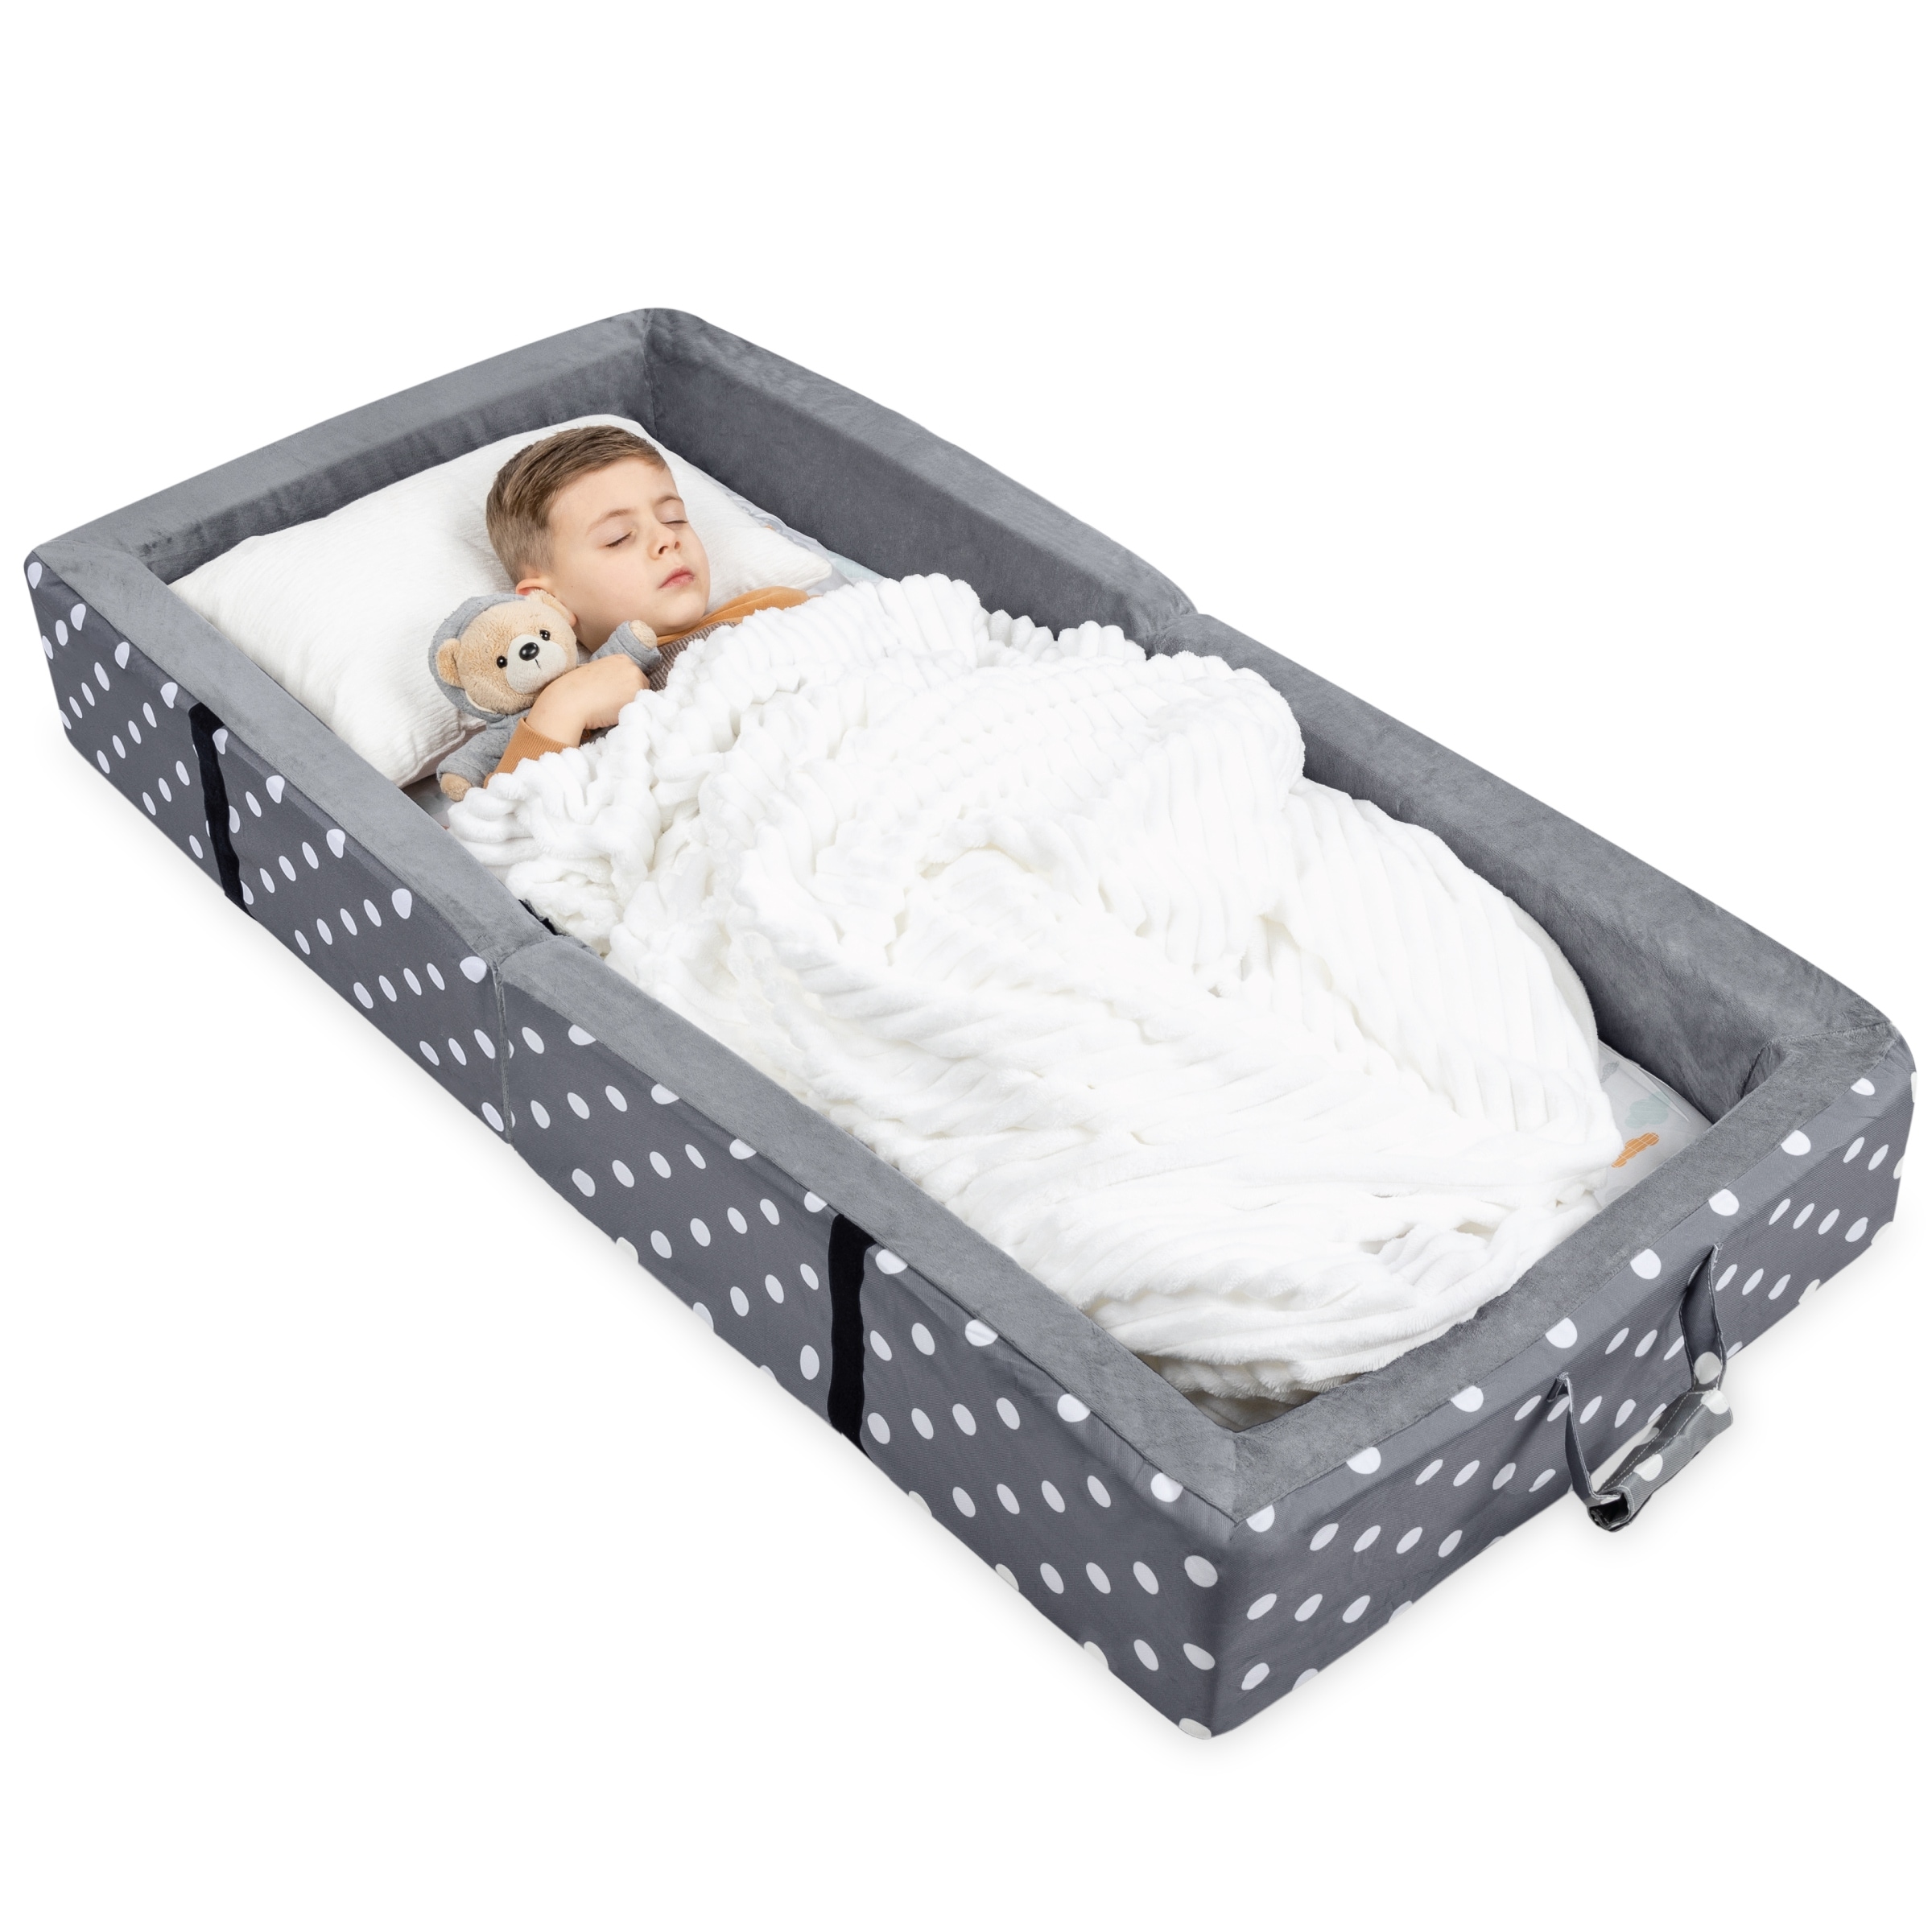 Milliard Portable Toddler Bumper Bed - Folds for Travel